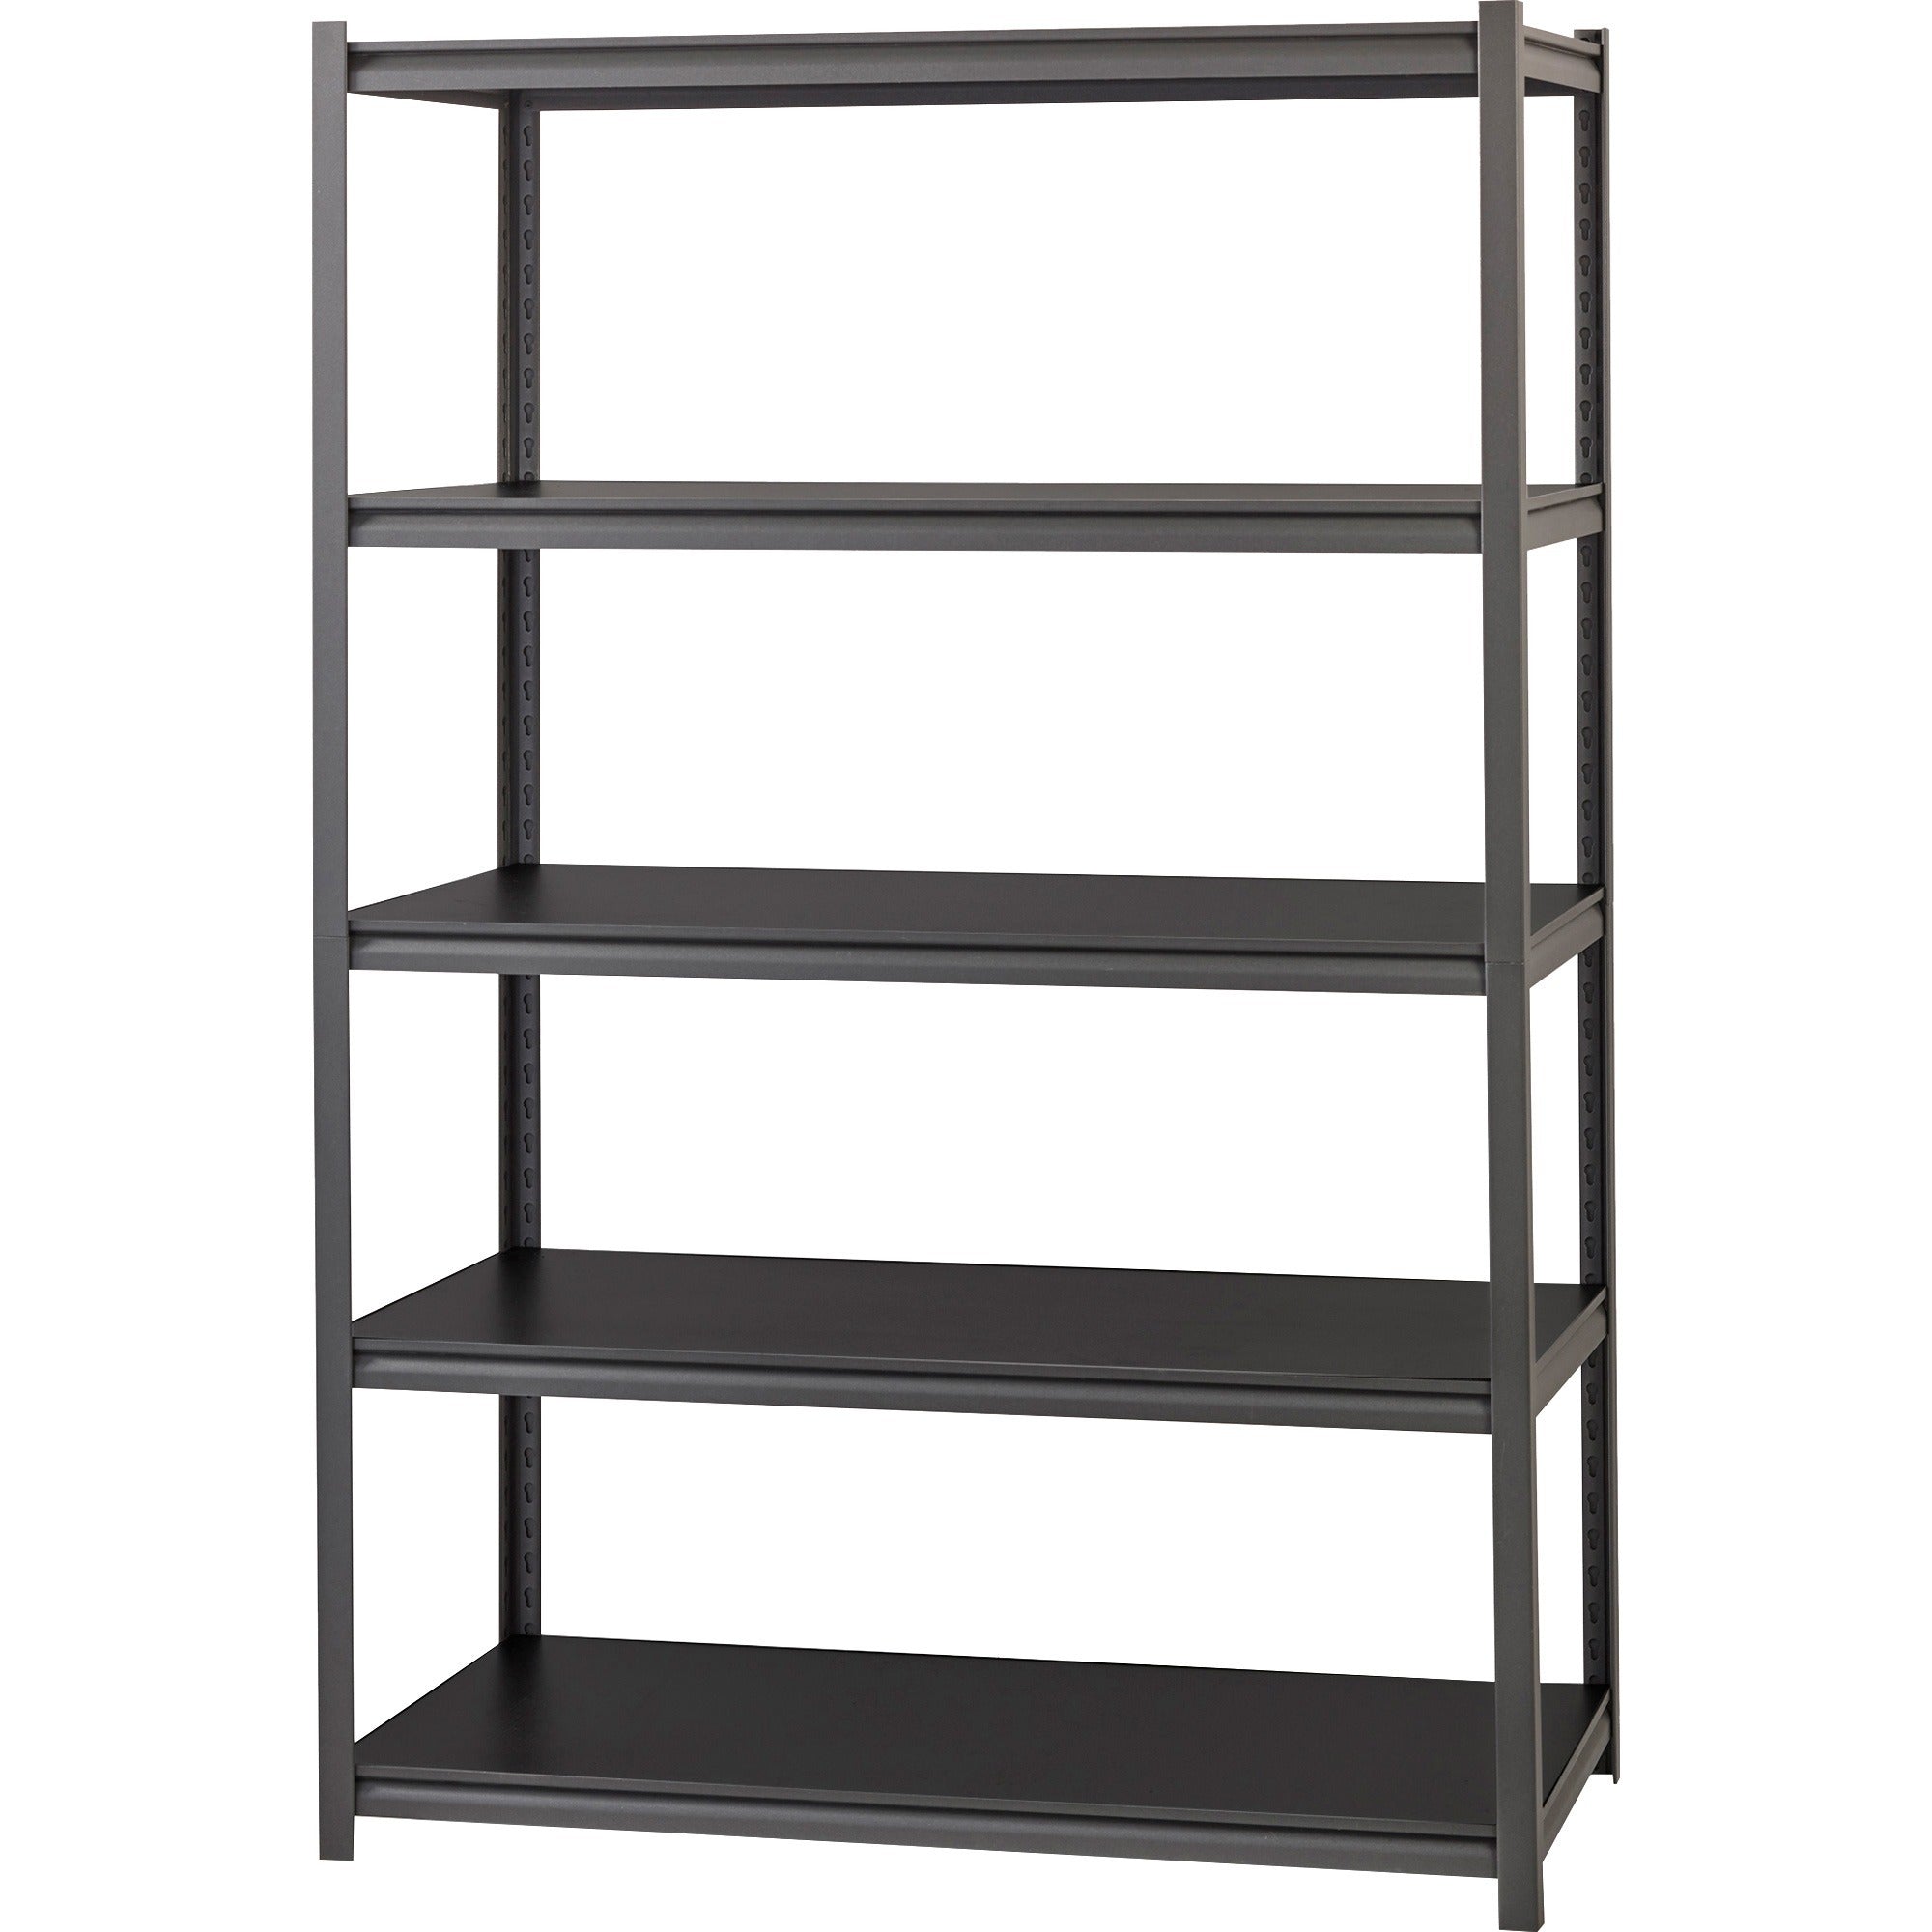 Lorell Iron Horse 3200 lb Capacity Riveted Shelving - 5 Shelf(ves) - 72" Height x 48" Width x 24" Depth - 30% Recycled - Black - Steel, Laminate - 1 Each - 3